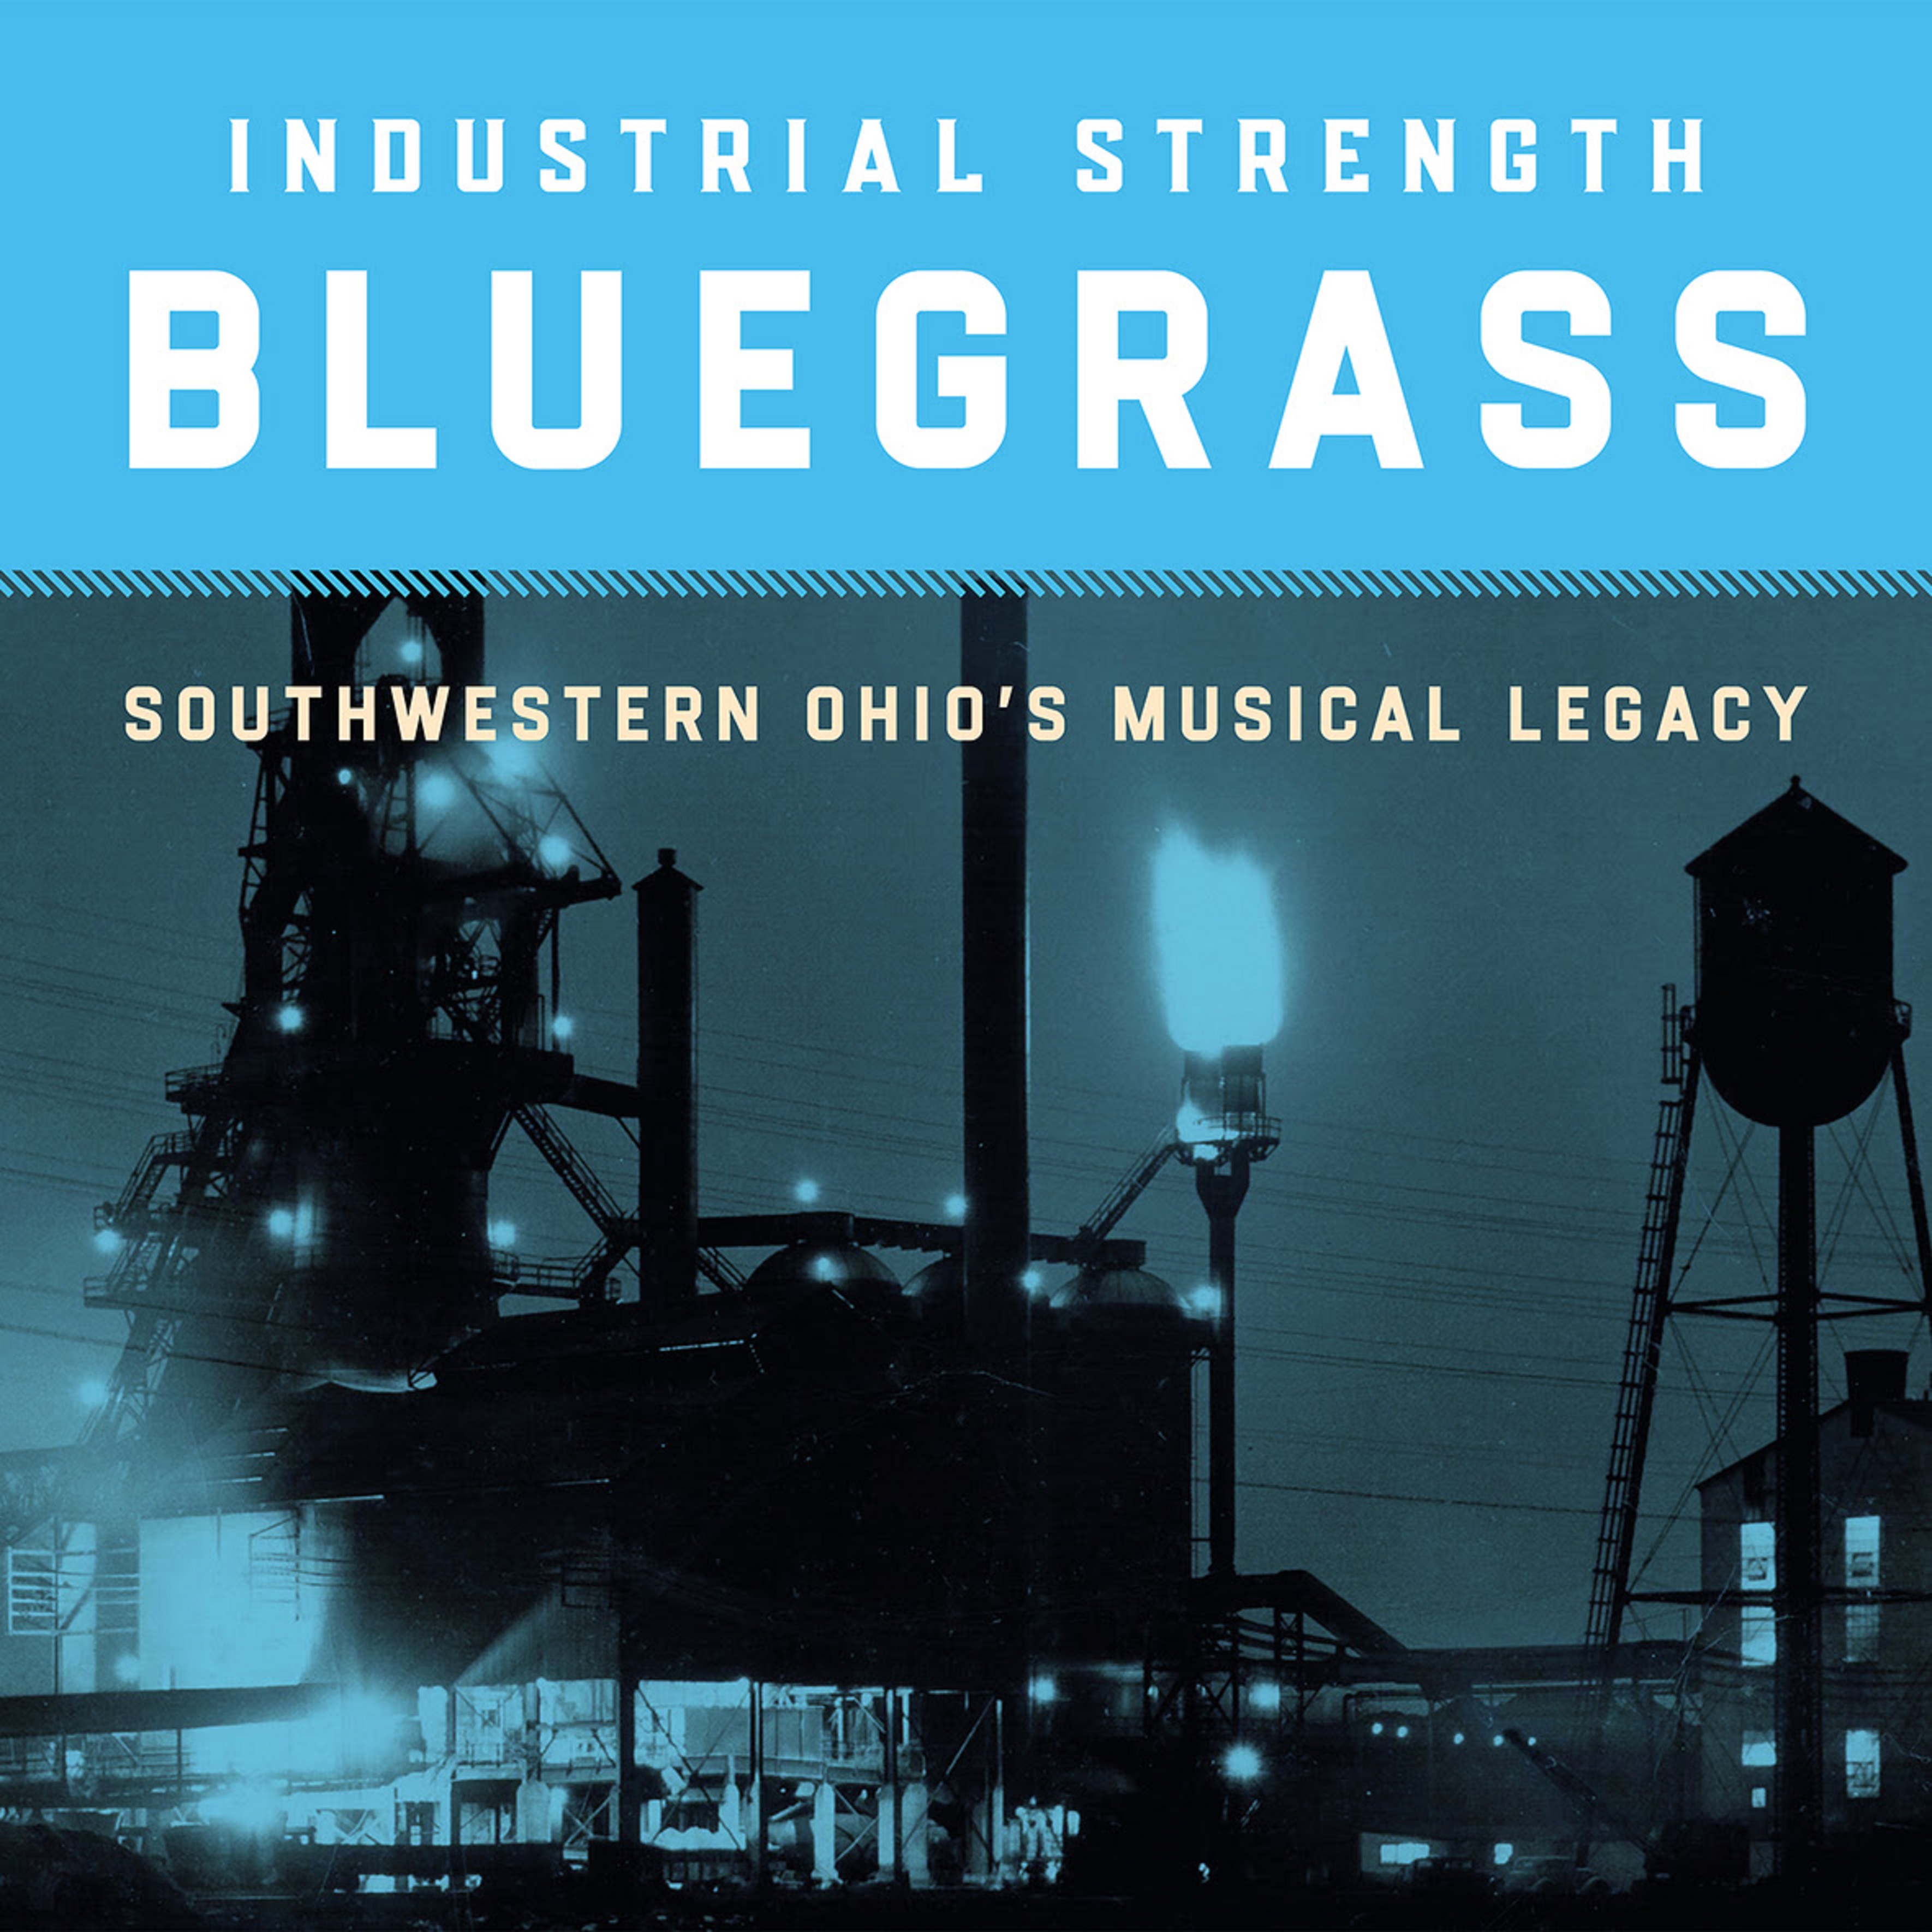 "Industrial Strength Bluegrass" with Rhonda Vincent and Caleb Daugherty